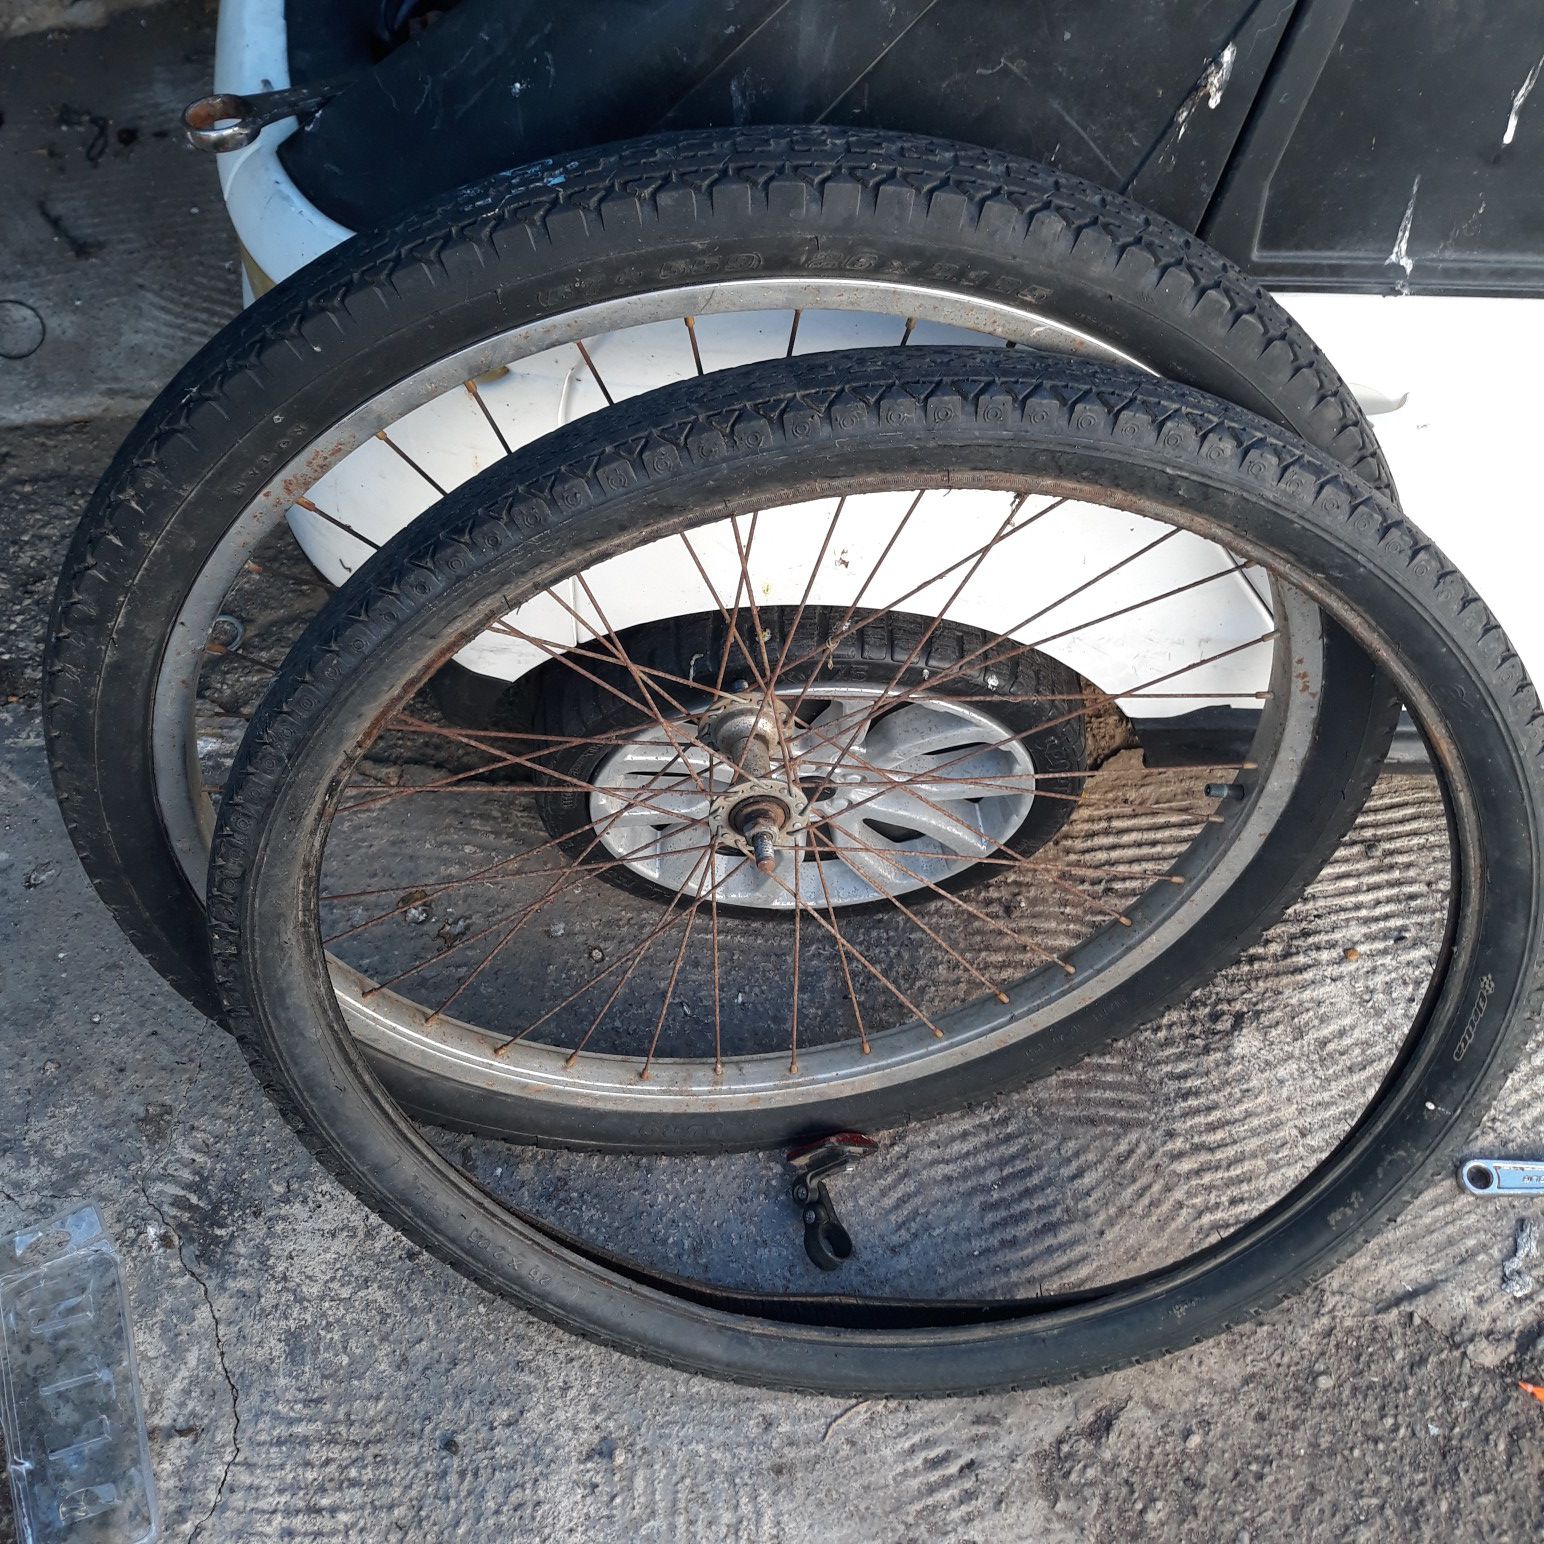 26" cruiser front tire